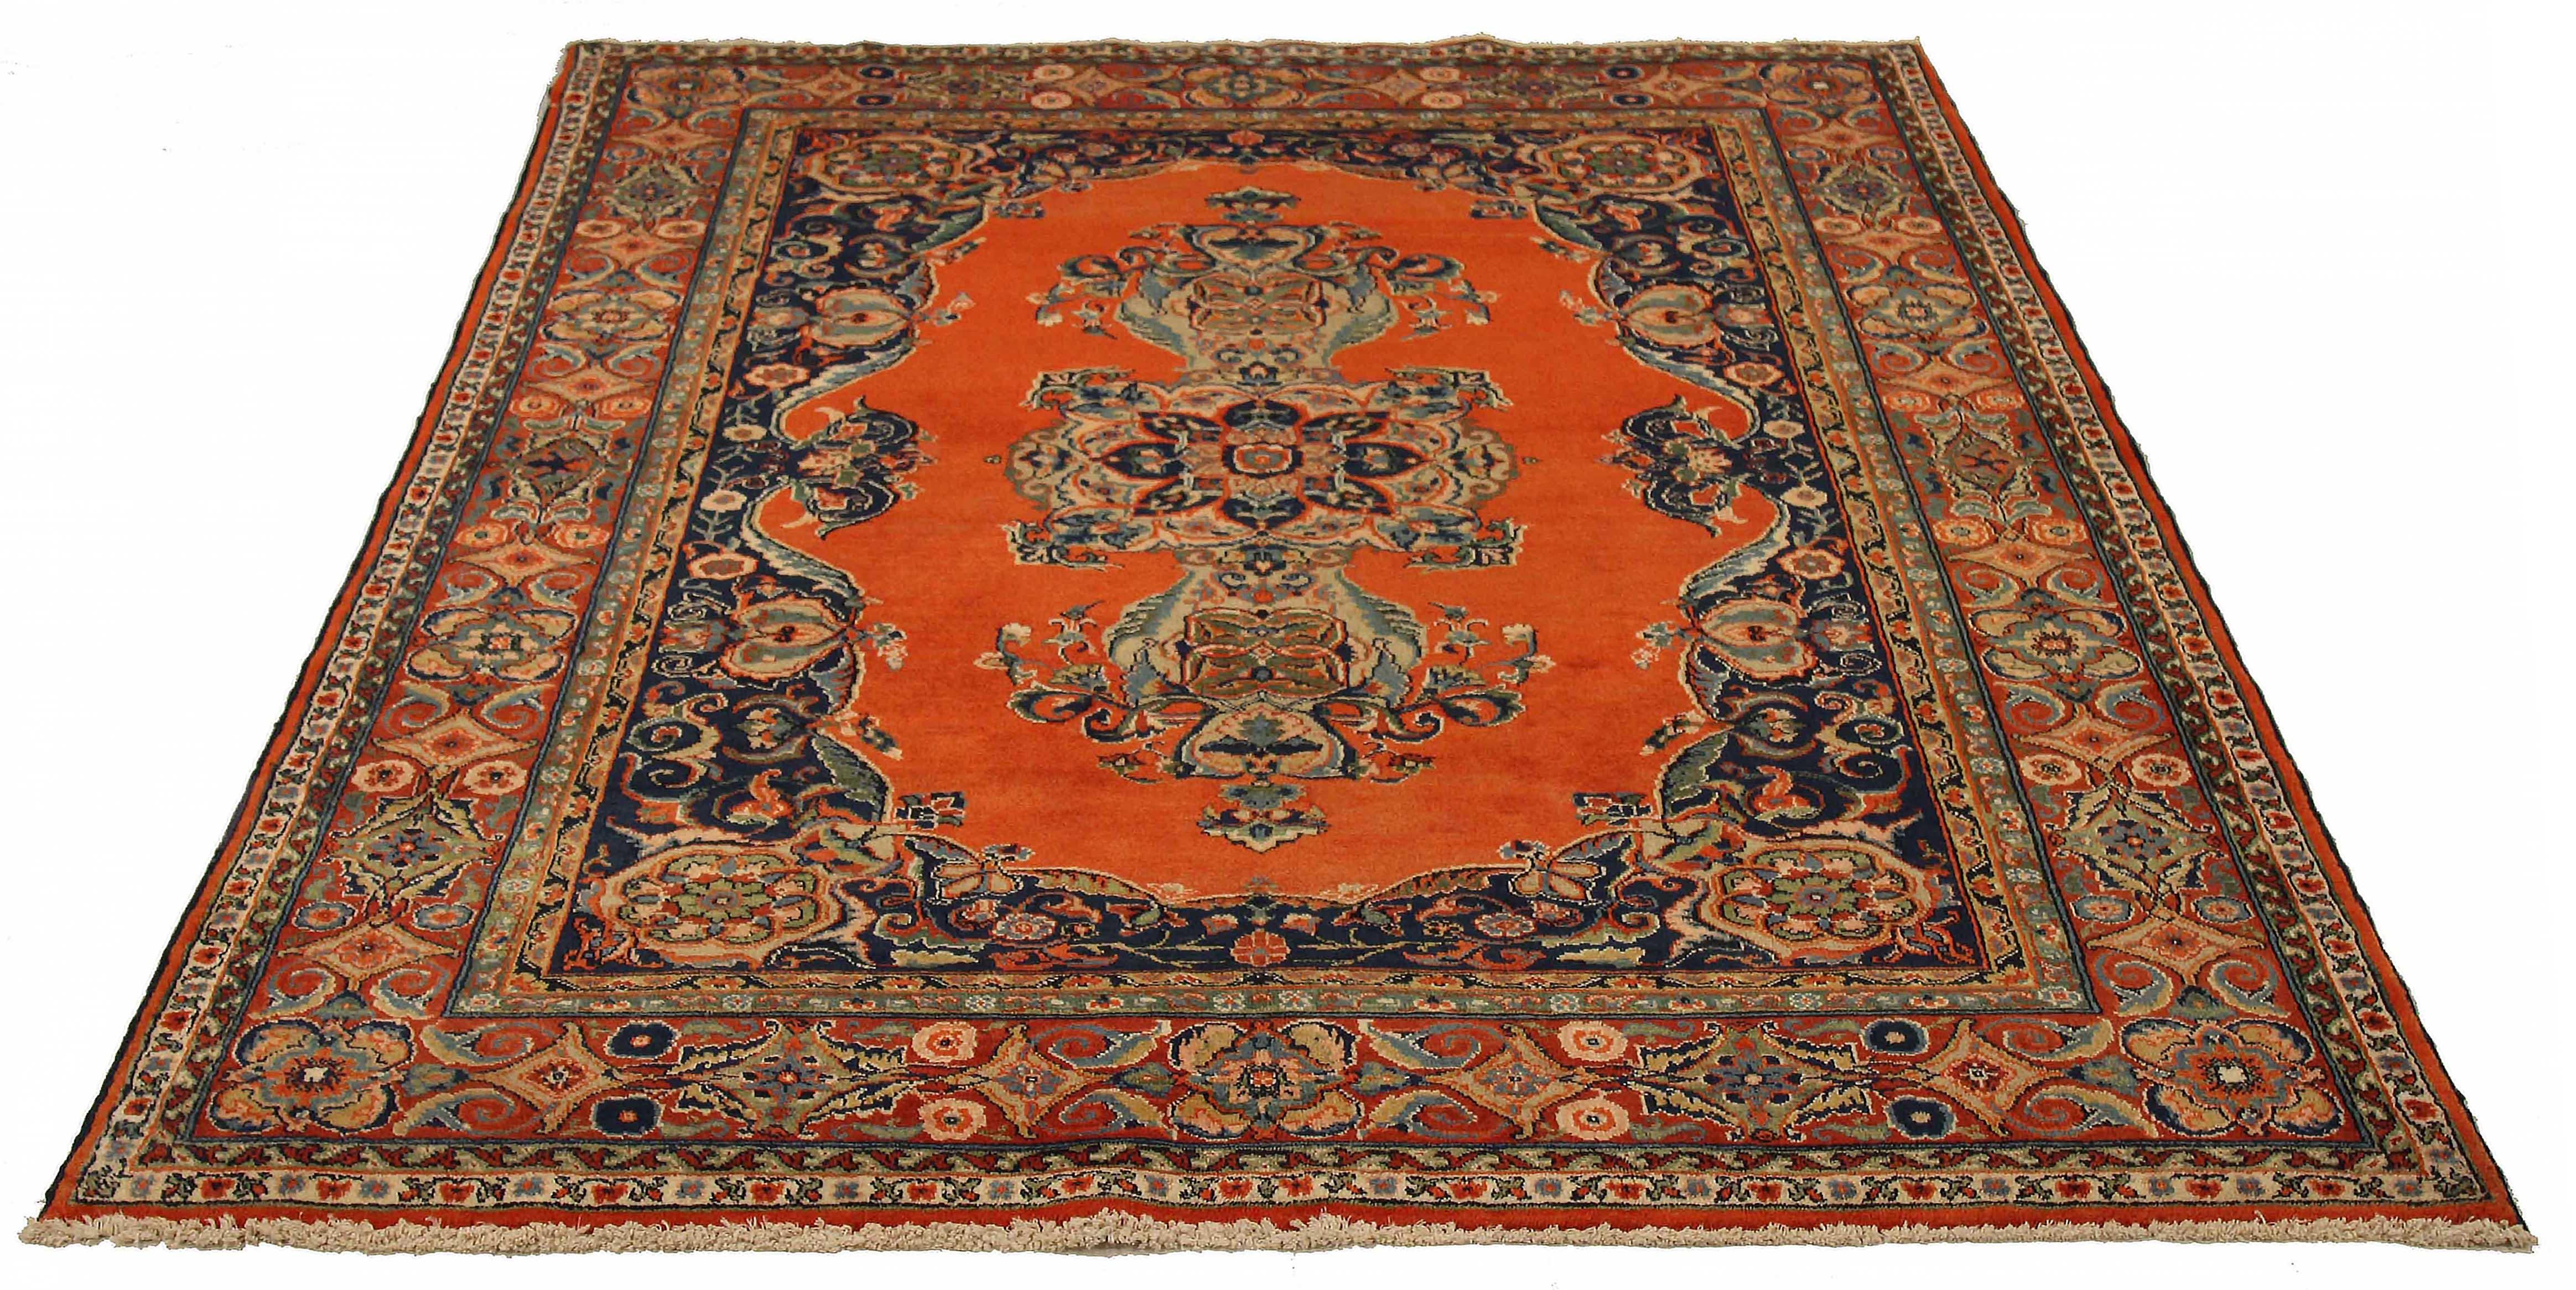 Antique Persian area rug handwoven from the finest sheep’s wool. It’s colored with all-natural vegetable dyes that are safe for humans and pets. It’s a traditional Azarbaijan design handwoven by expert artisans. It’s a lovely area rug that can be